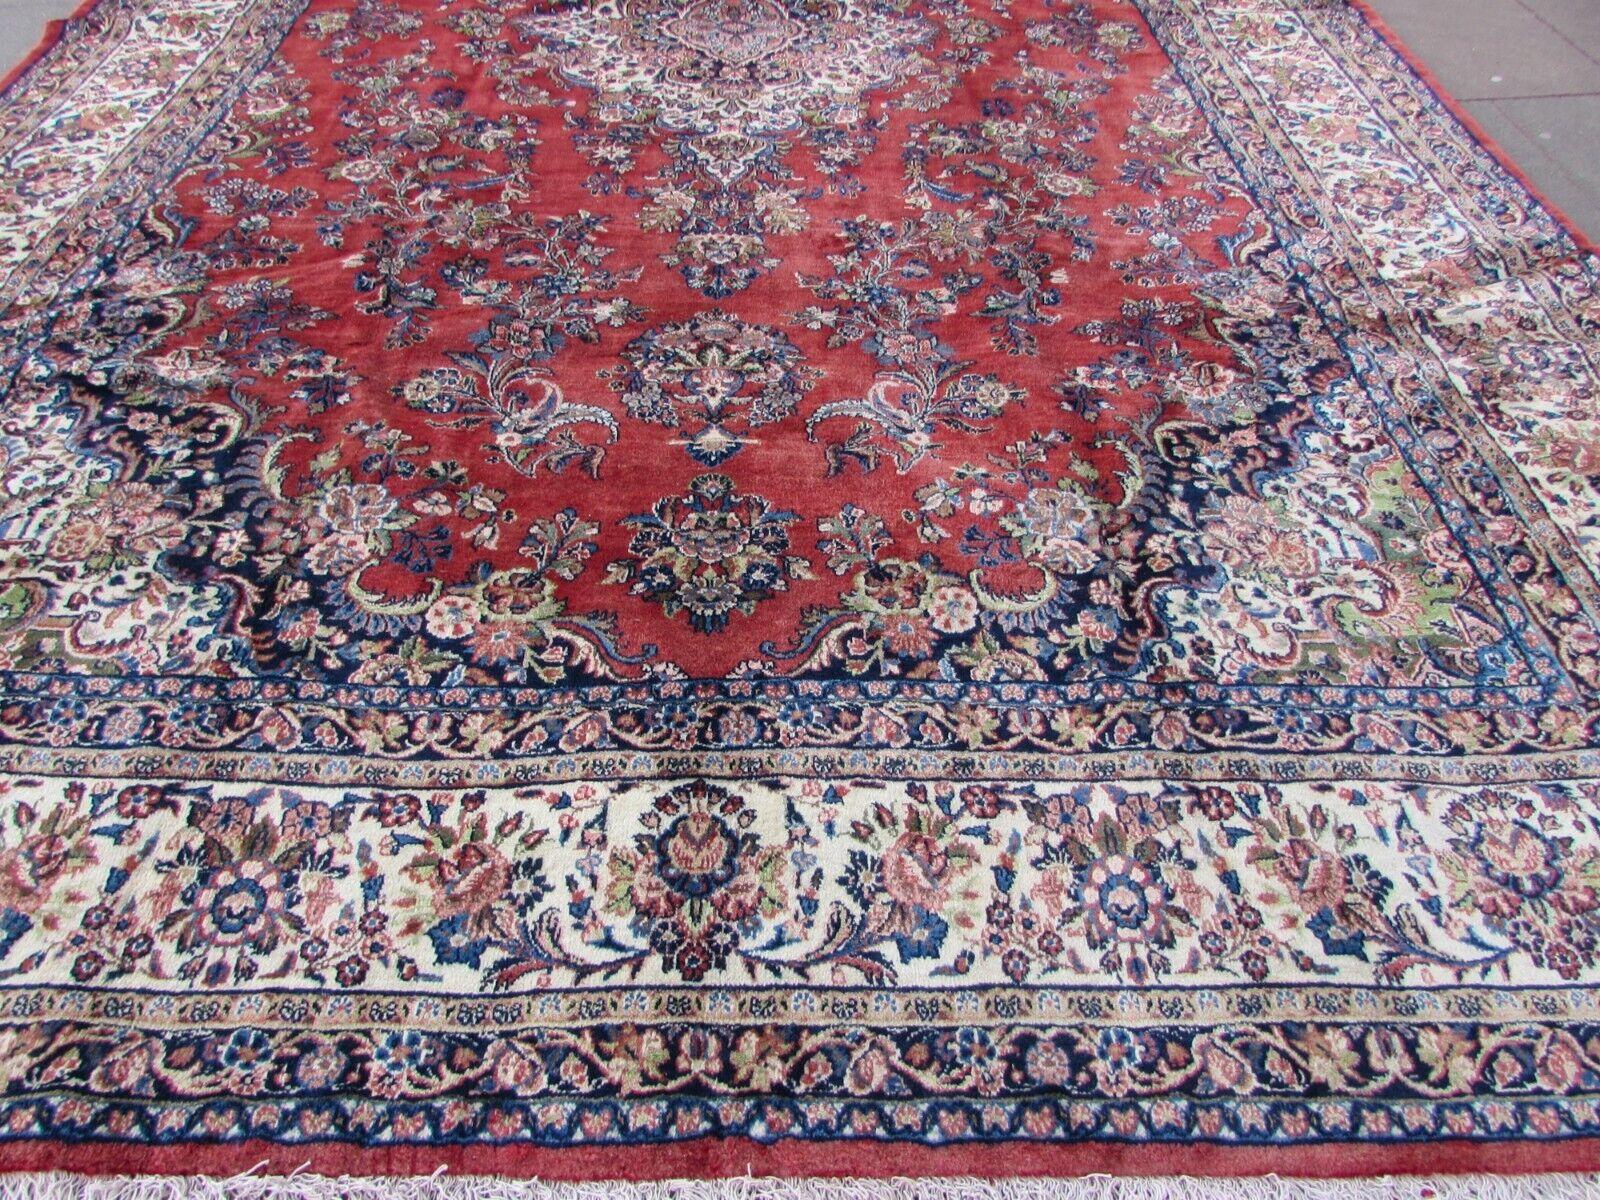 French Handmade Vintage Persian Style Sarouk Oversize Rug 10.3' x 16.2', 1970s, 1Q58 For Sale